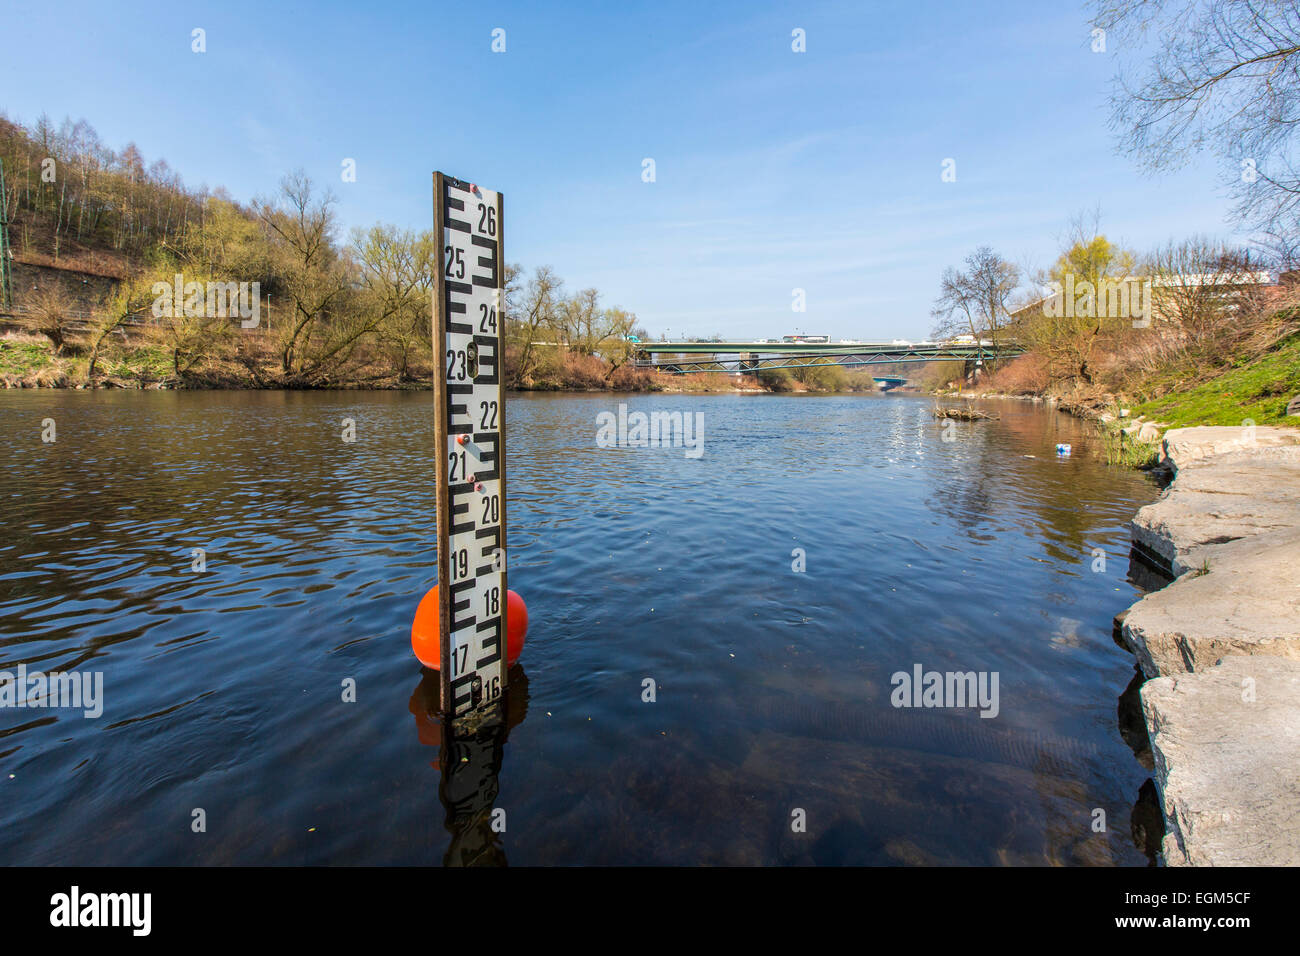 Level measurement of river Ruhr, Stock Photo